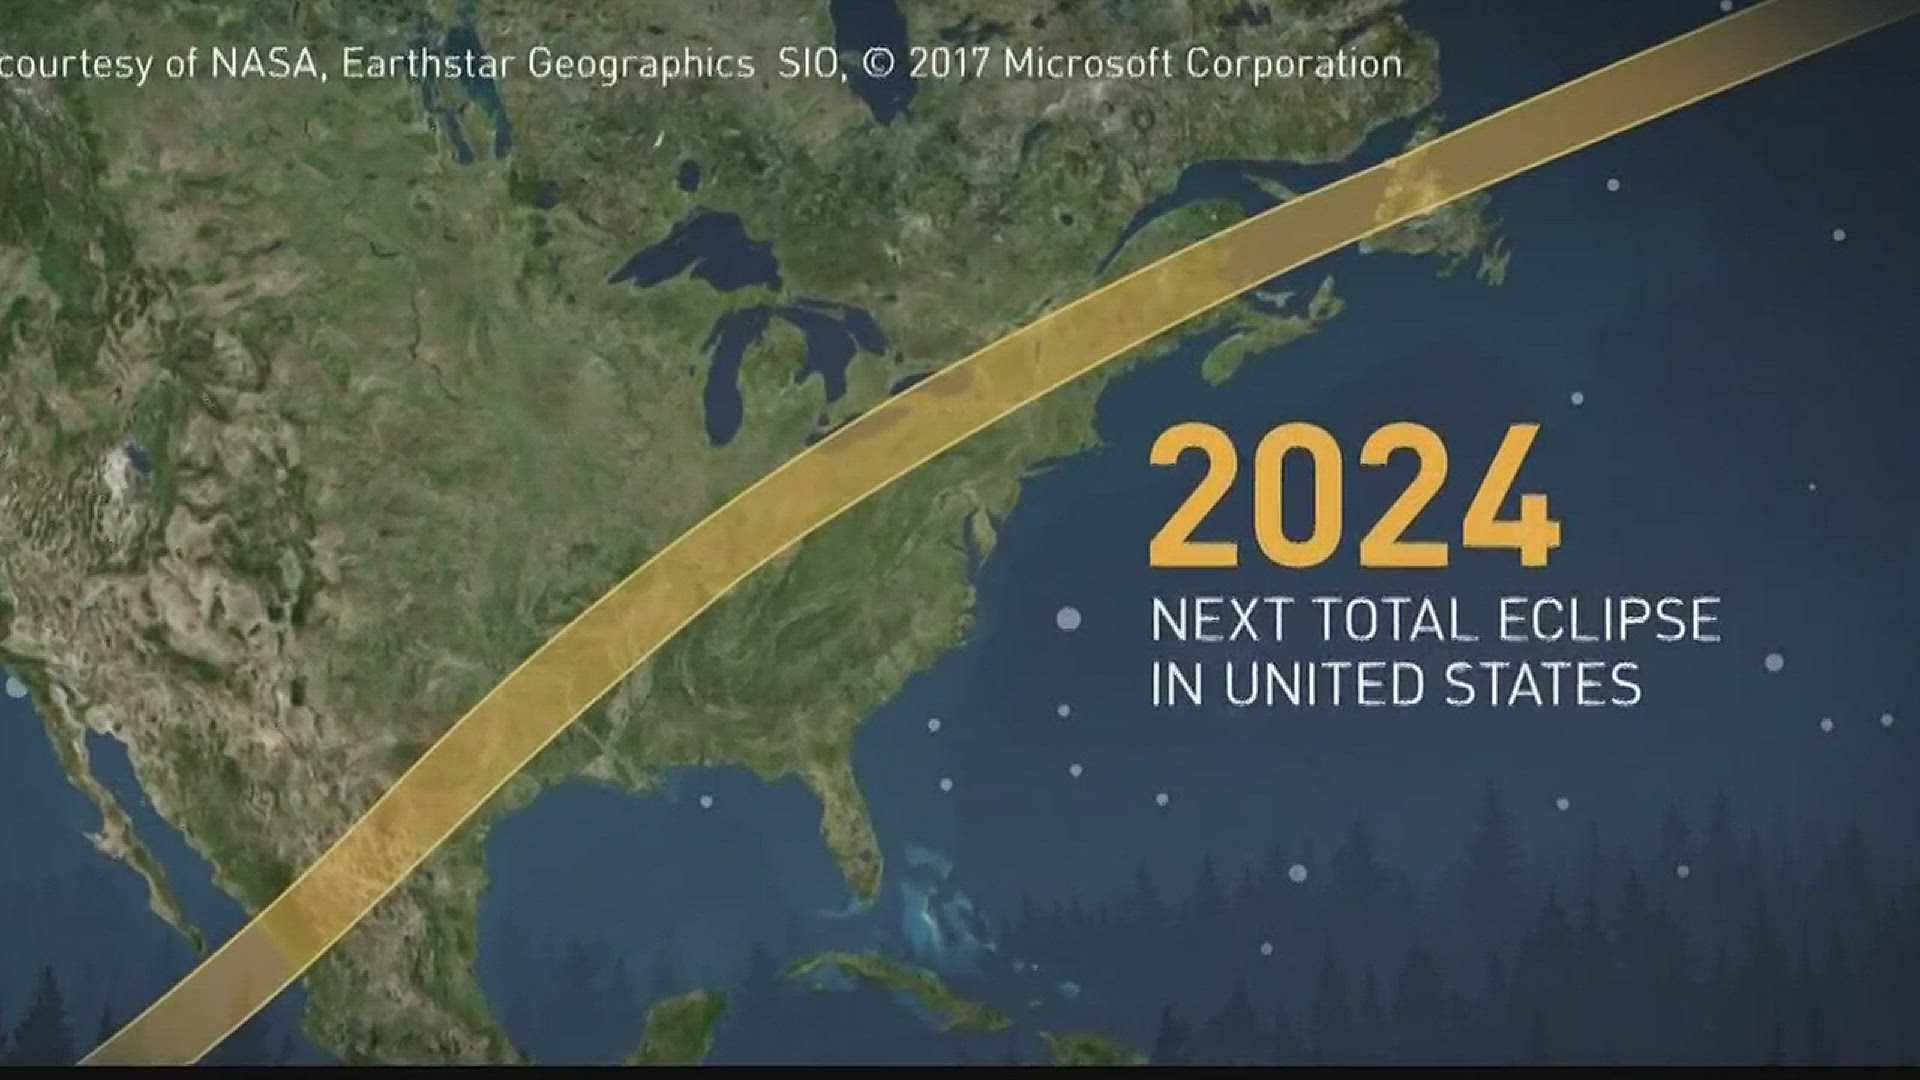 In 2024, Total Eclipse Comes to WNY